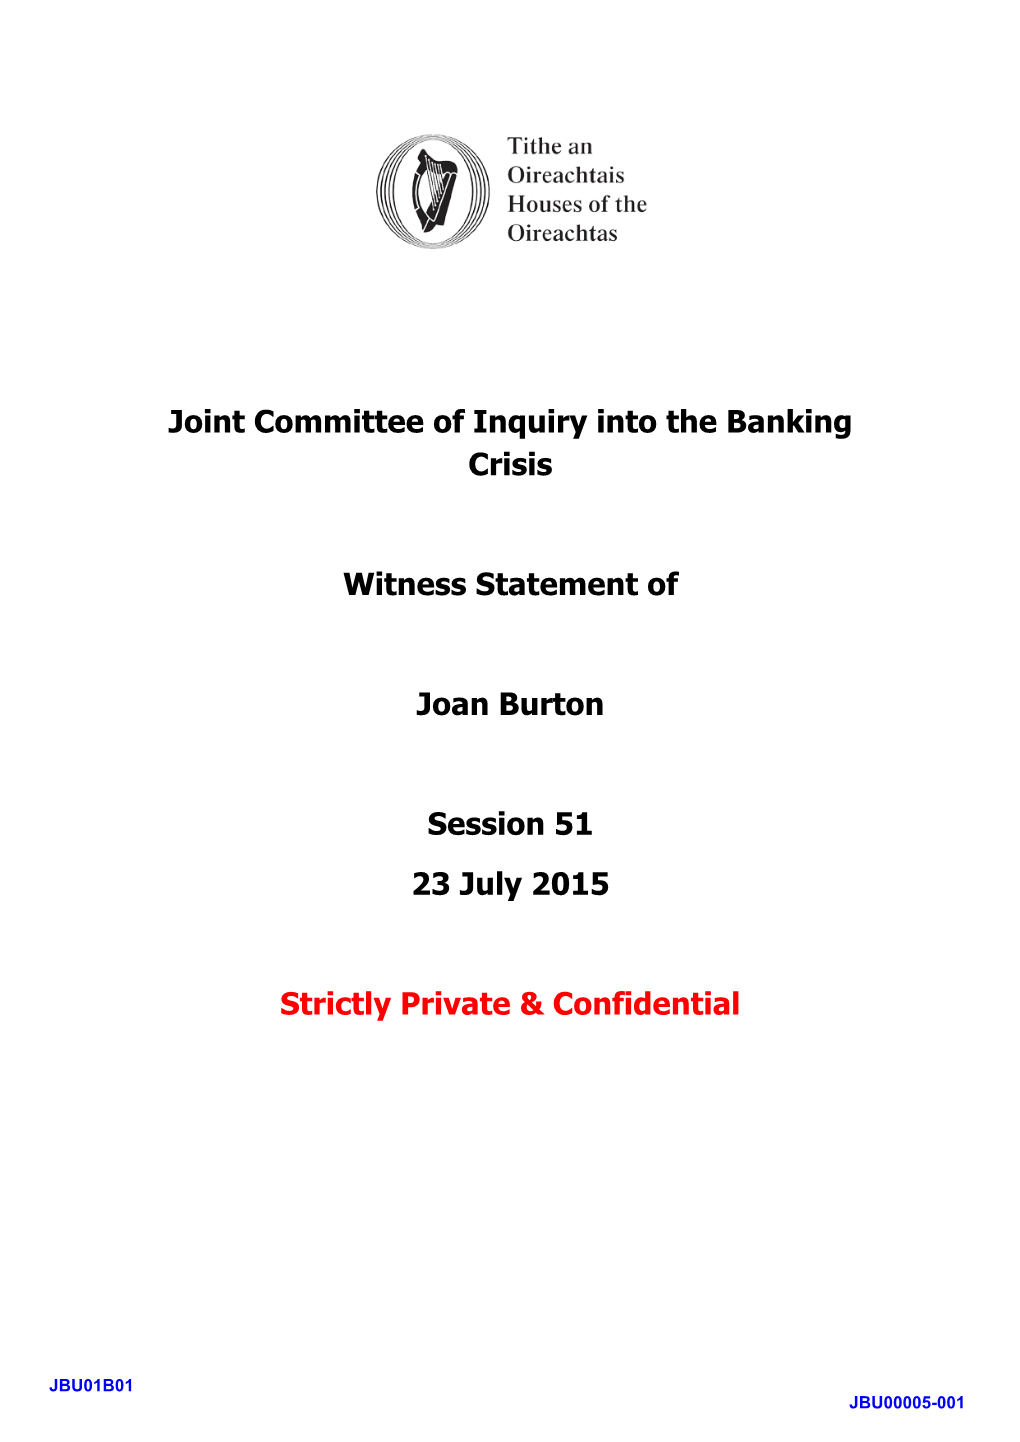 Joint Committee of Inquiry Into the Banking Crisis Witness Statement